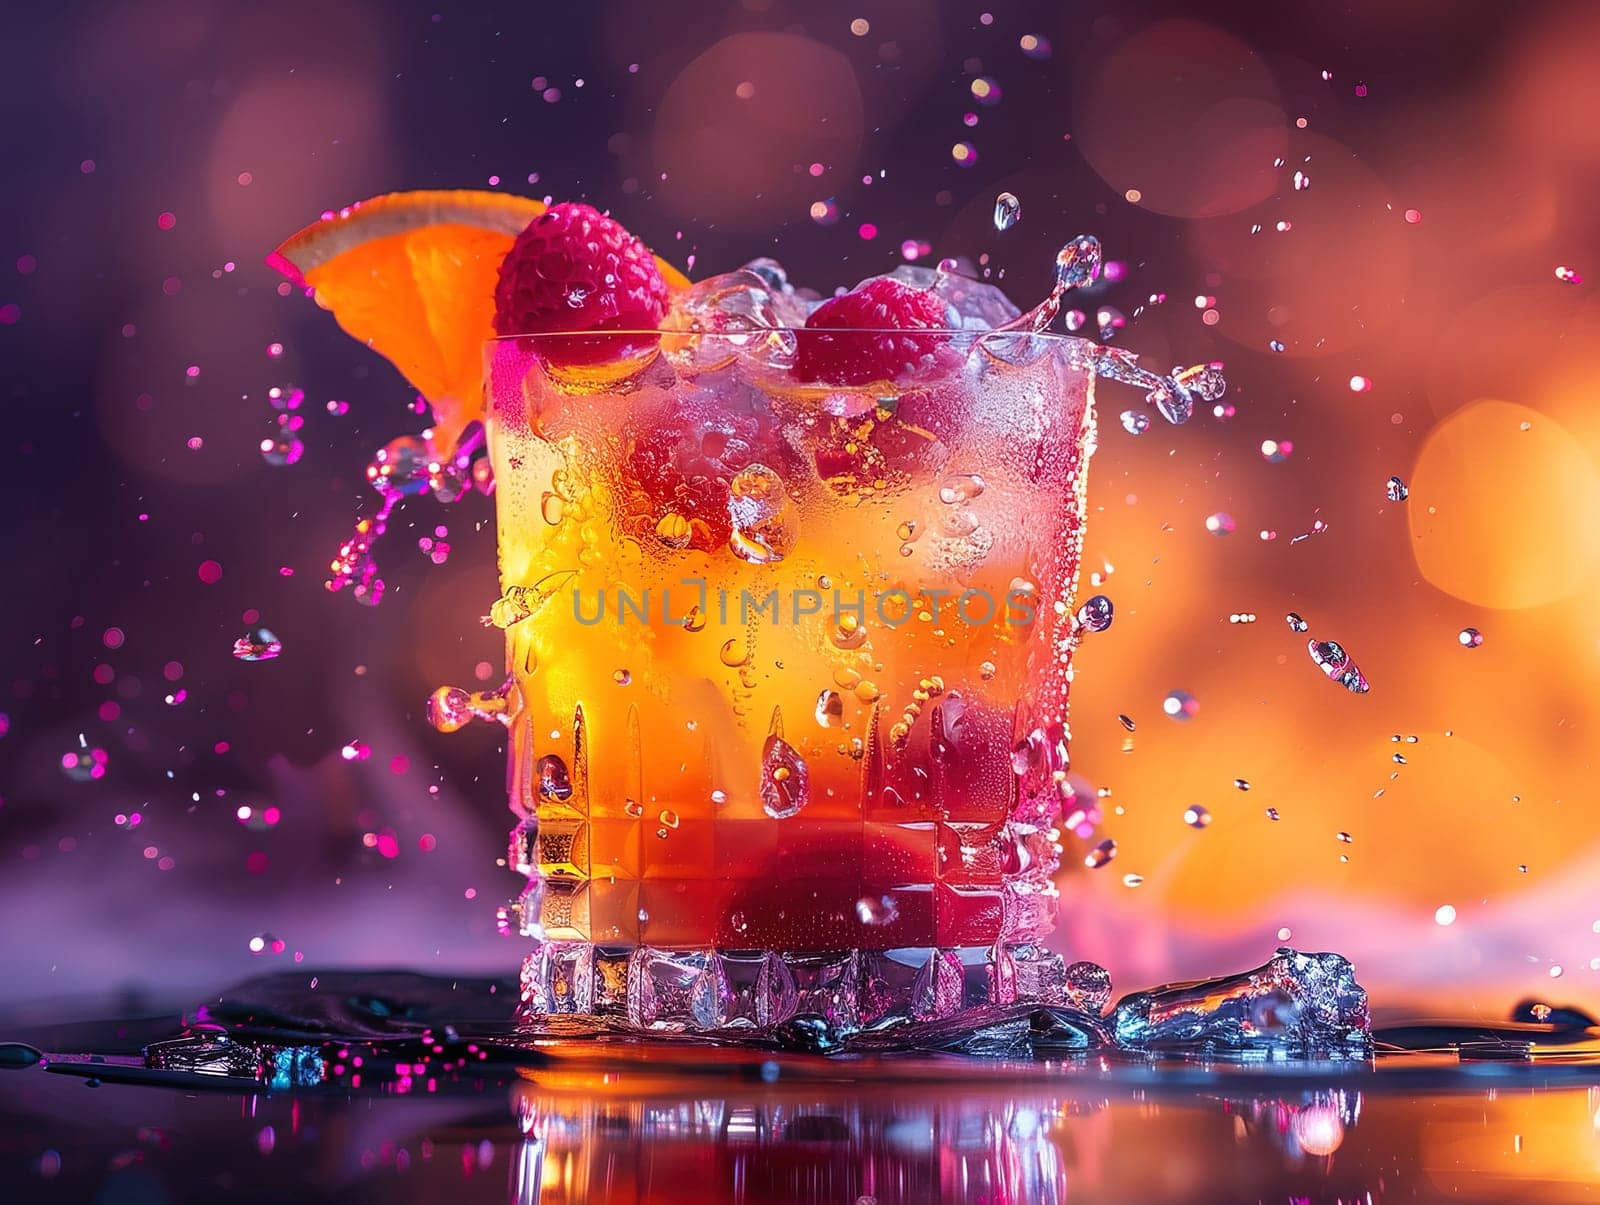 Fresh cocktail with orange and ice. Delicious Screwdriver cocktail photography, explosion flavors studio lighting, studio background, well-lit vibrant colors, sharp-focus, high-quality, artistic, unique